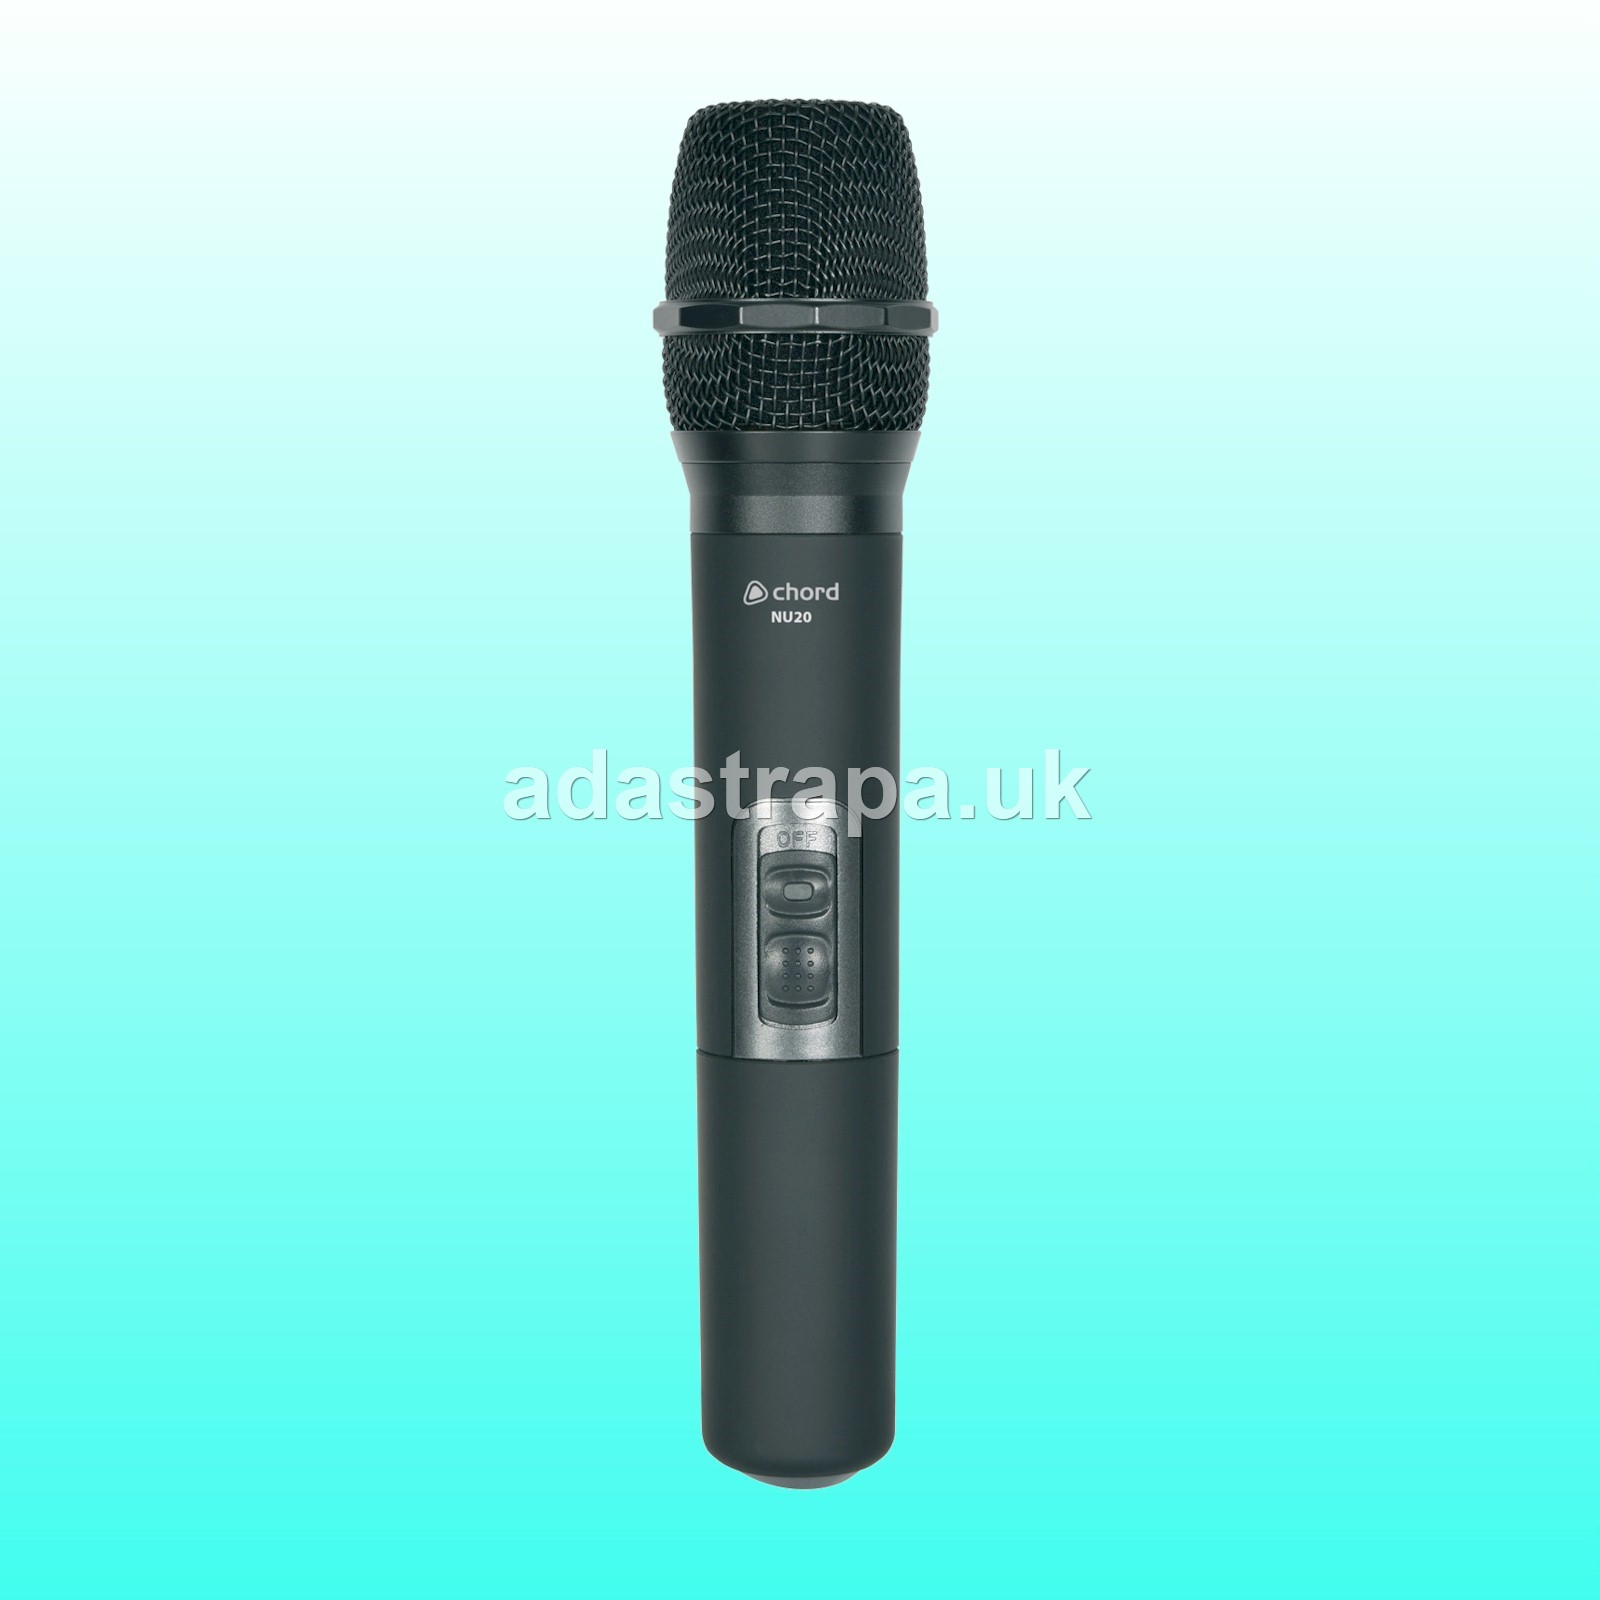 Chord NU20-HT-863.8 Replacement Handheld Transmitter 863.8MHz for NU20 System - 171.927UK